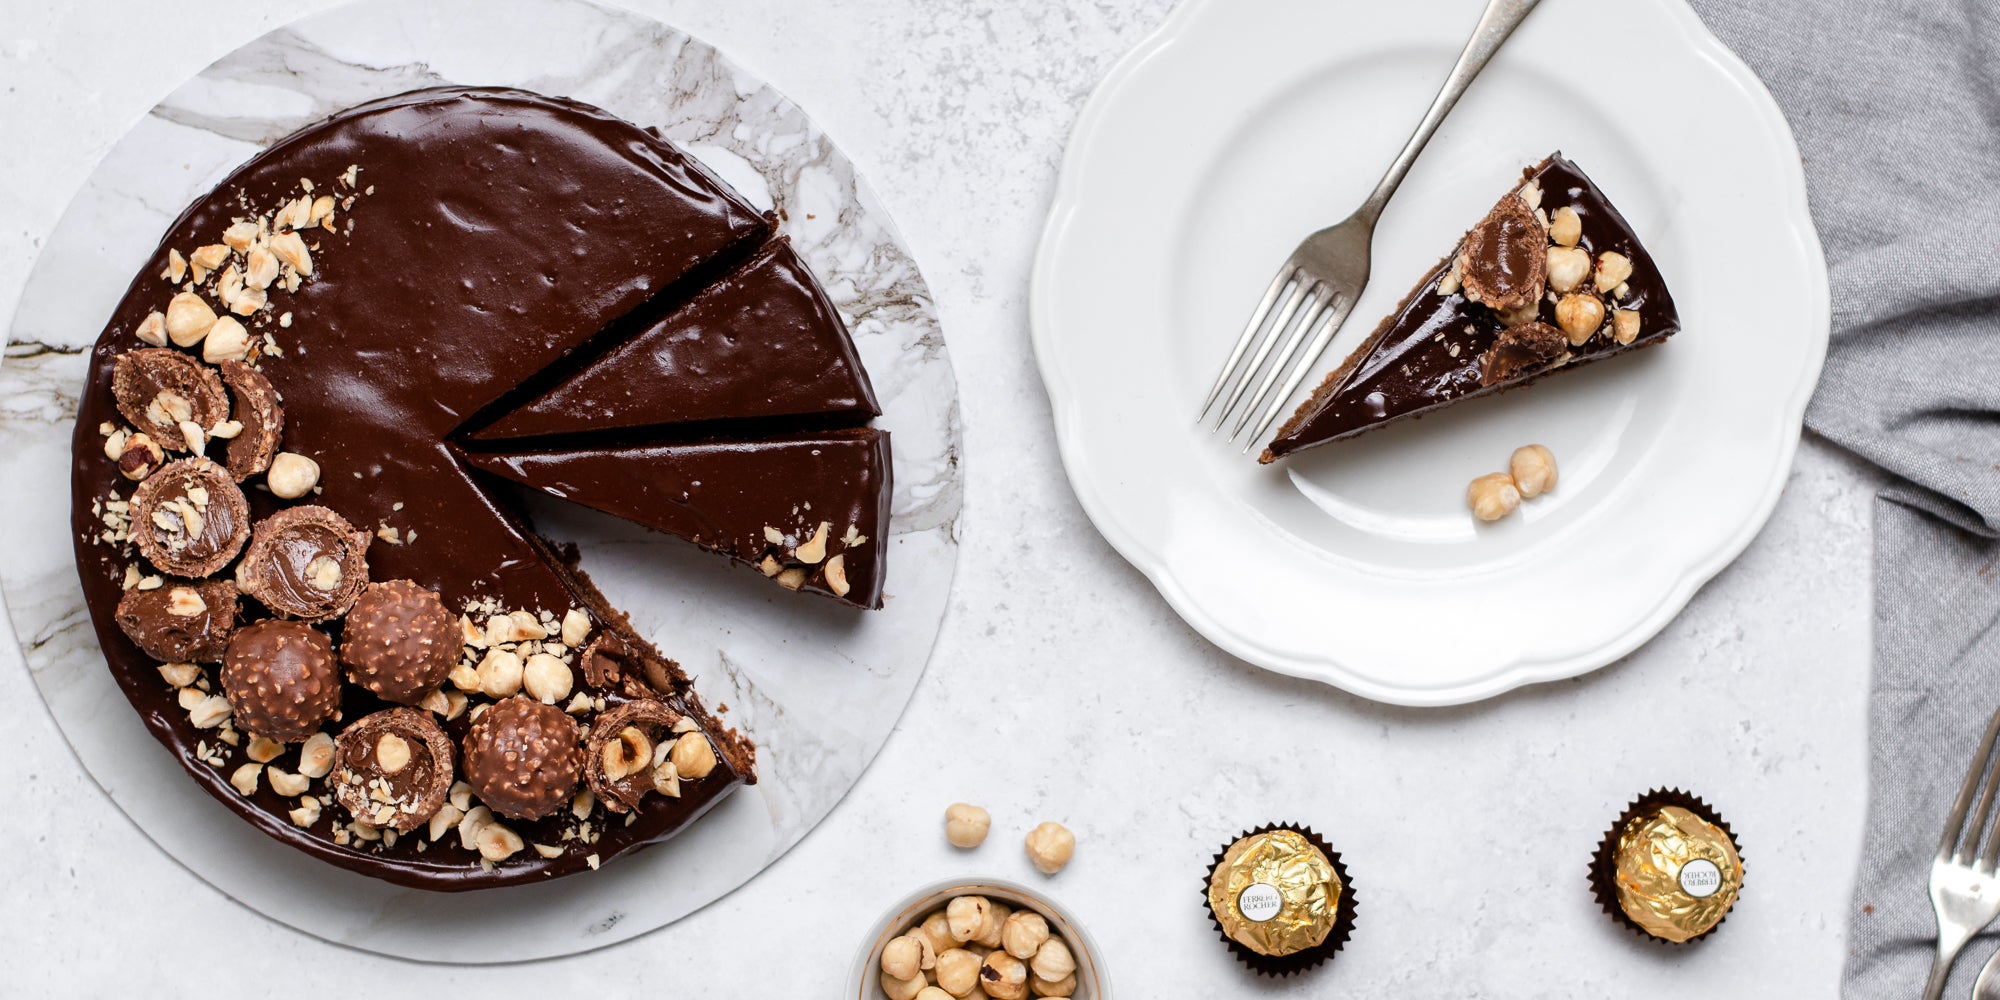 Top view of Gluten Free Chocolate Truffle Sachertorte sliced into servings, with a slice served on a plate next to a fork. Smothered in chocolate icing, Sprinkled with Ferrero Rochers and chopped hazelnuts.